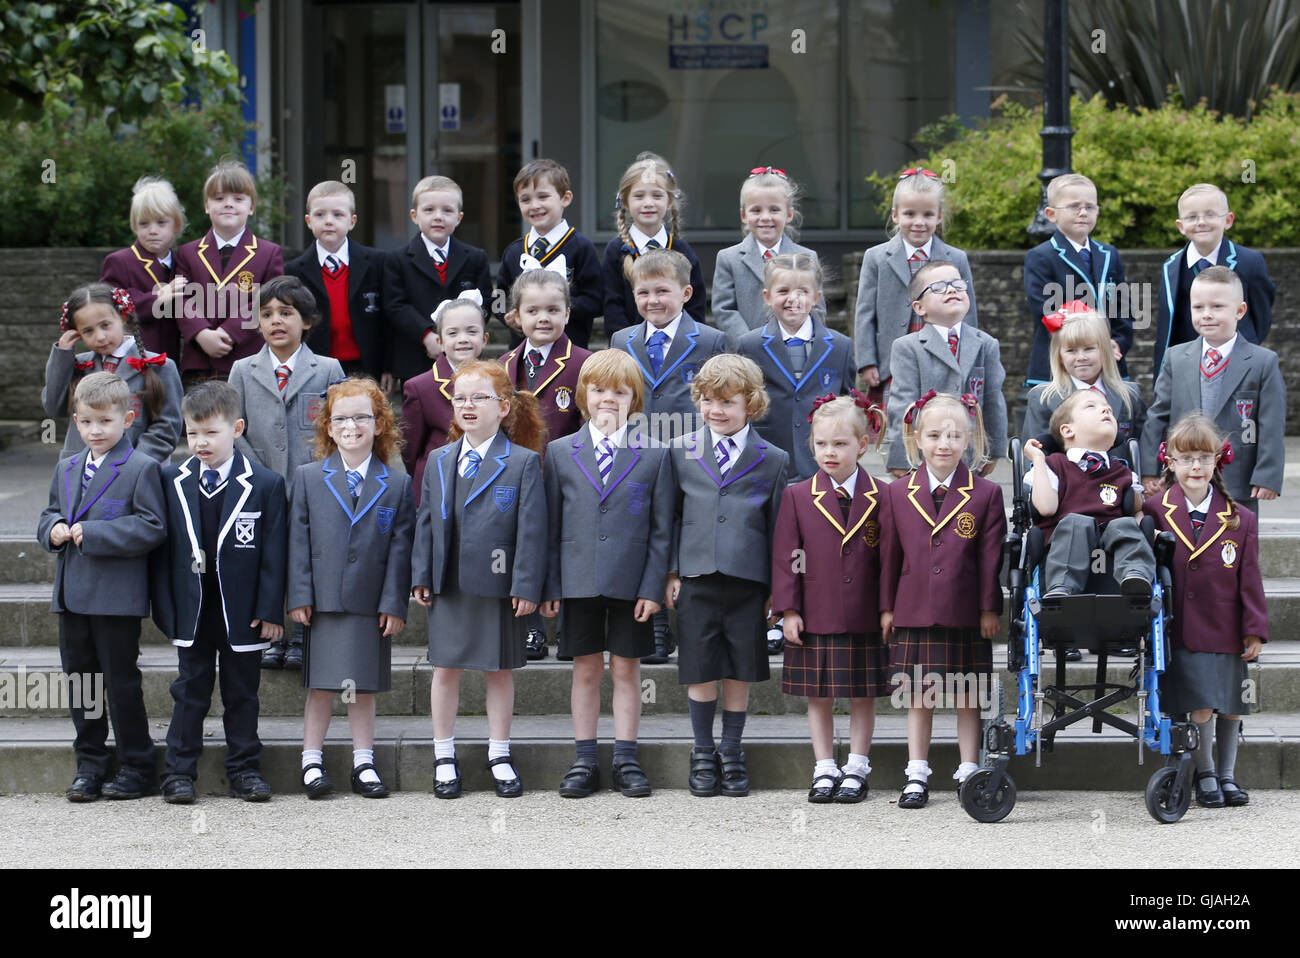 15 sets of twins, from the Inverclyde area, pose for a photograph in Clyde Square in Greenock, ahead of their first day at school. Pictured are (back row left to right) Emma and Grace McEleny (4), Fraser and Nathan McGrath (5), Jackson and Elizabeth Reid (5), Brooke and Skye Smith (4), Andrew and Thomas Stewart (4), (middle row left to right) Charlotte and Morgan Goyal (5), Orlagh and Niamh Keen (4), Charlie and Olivia Lyne (5), Cameron MacKenzie and Caitlin MacKenzie (NOT PICTURED) (4), Olivia and Rhogen McCurry (5), (front row left to right) Craig and Stuart Arthur (5), Caragh and Sophie Doi Stock Photo